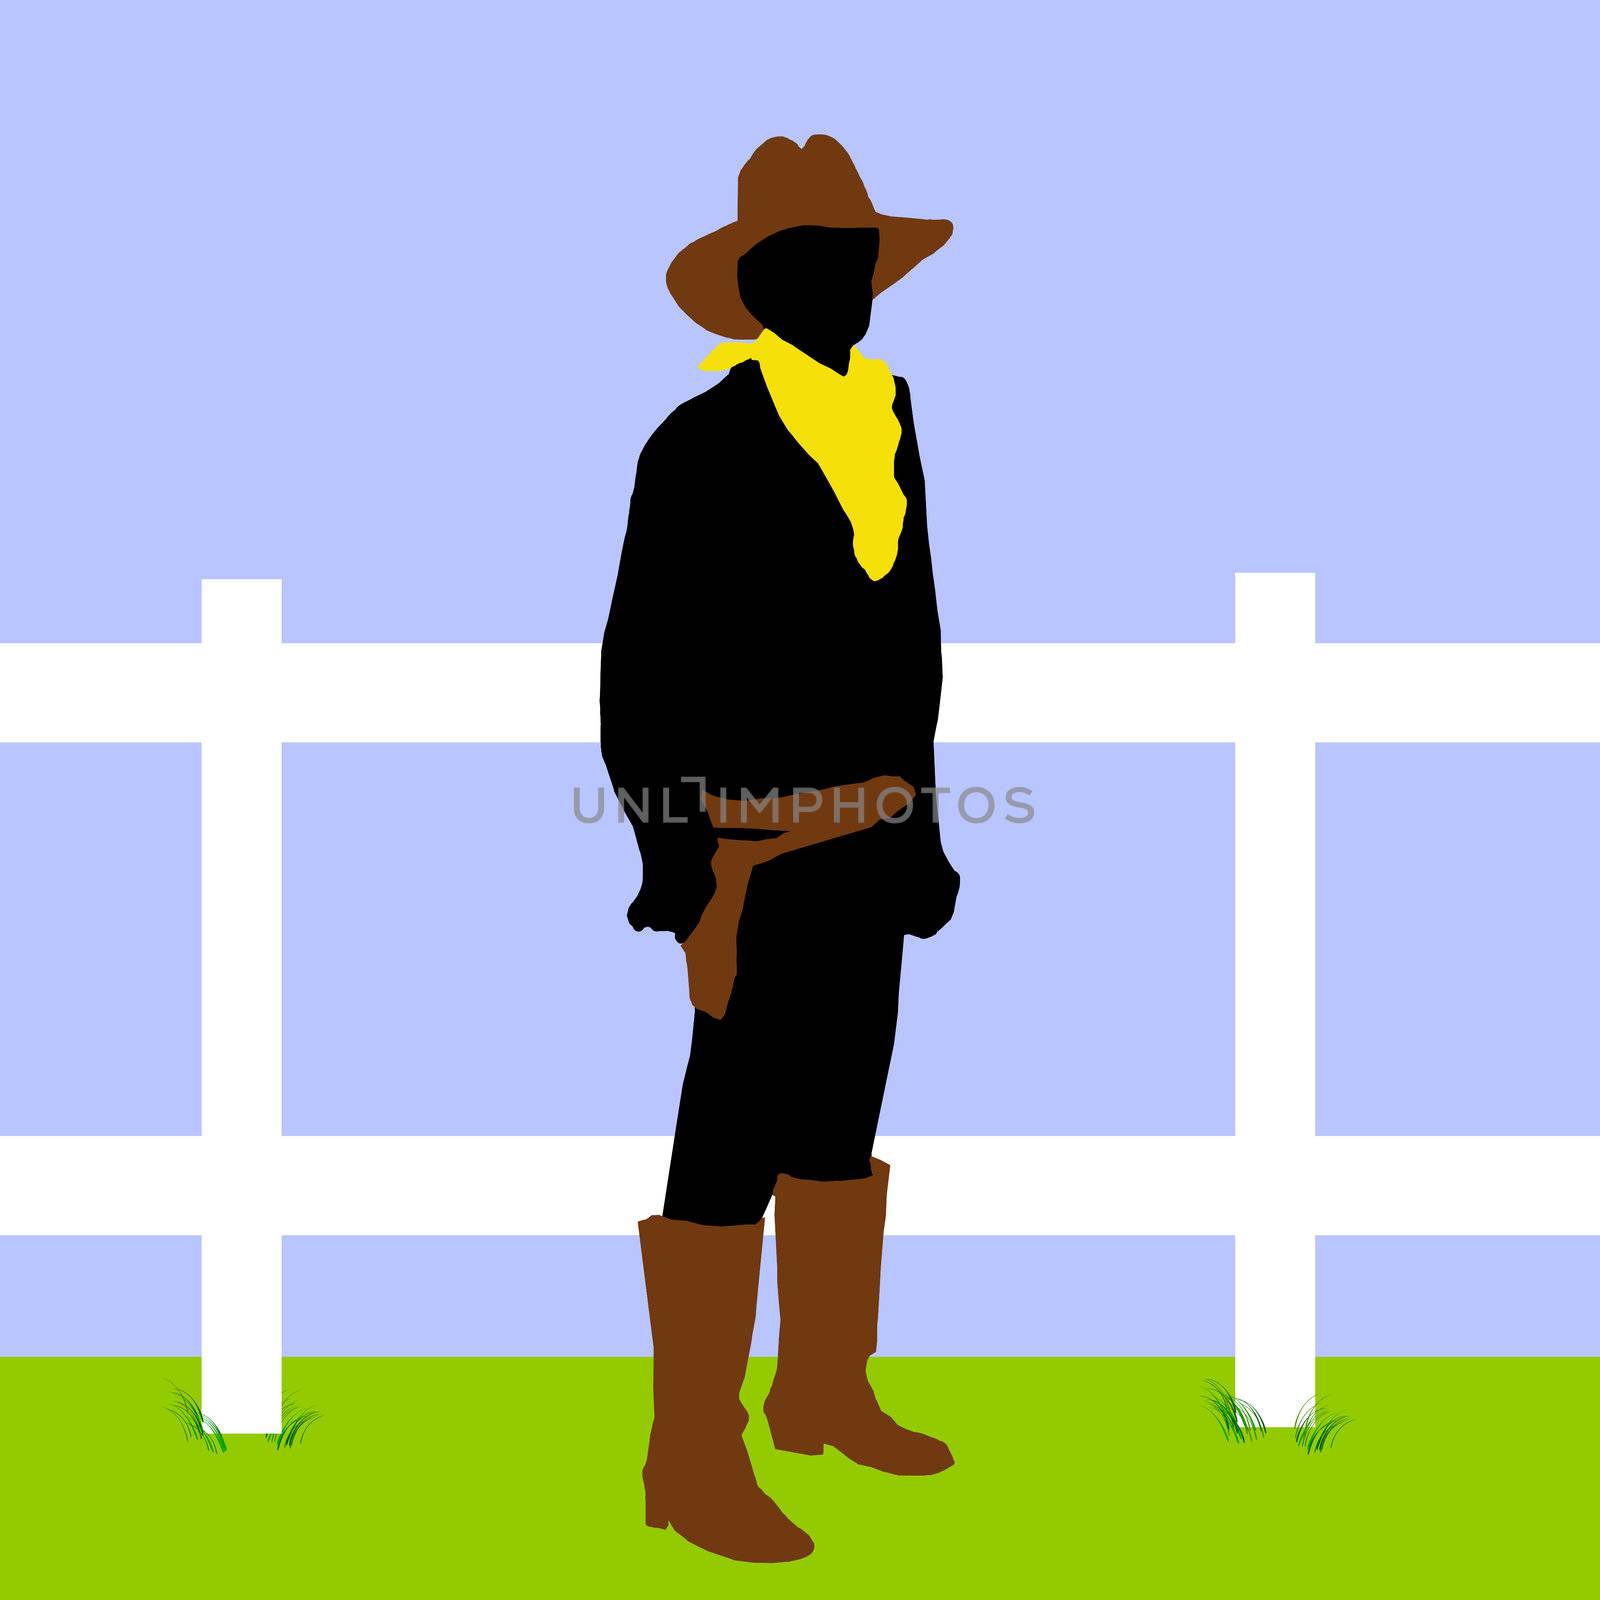 A cowboy in black on a background of blue and green with a white fence.